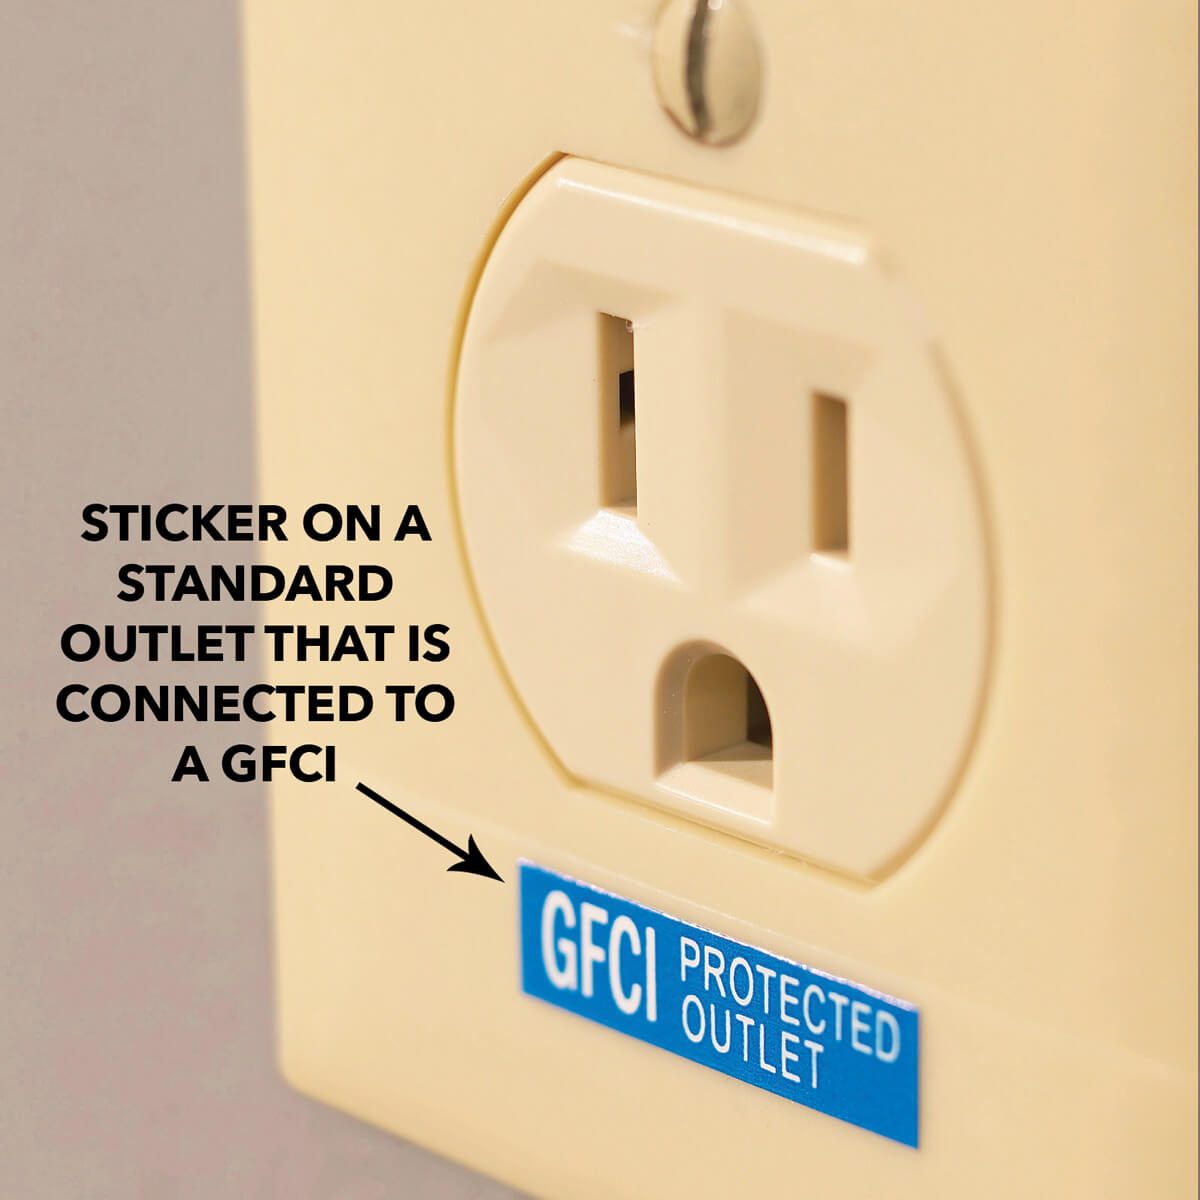 Troubleshooting Dead Outlets And What To Do When Gfci Wont Reset